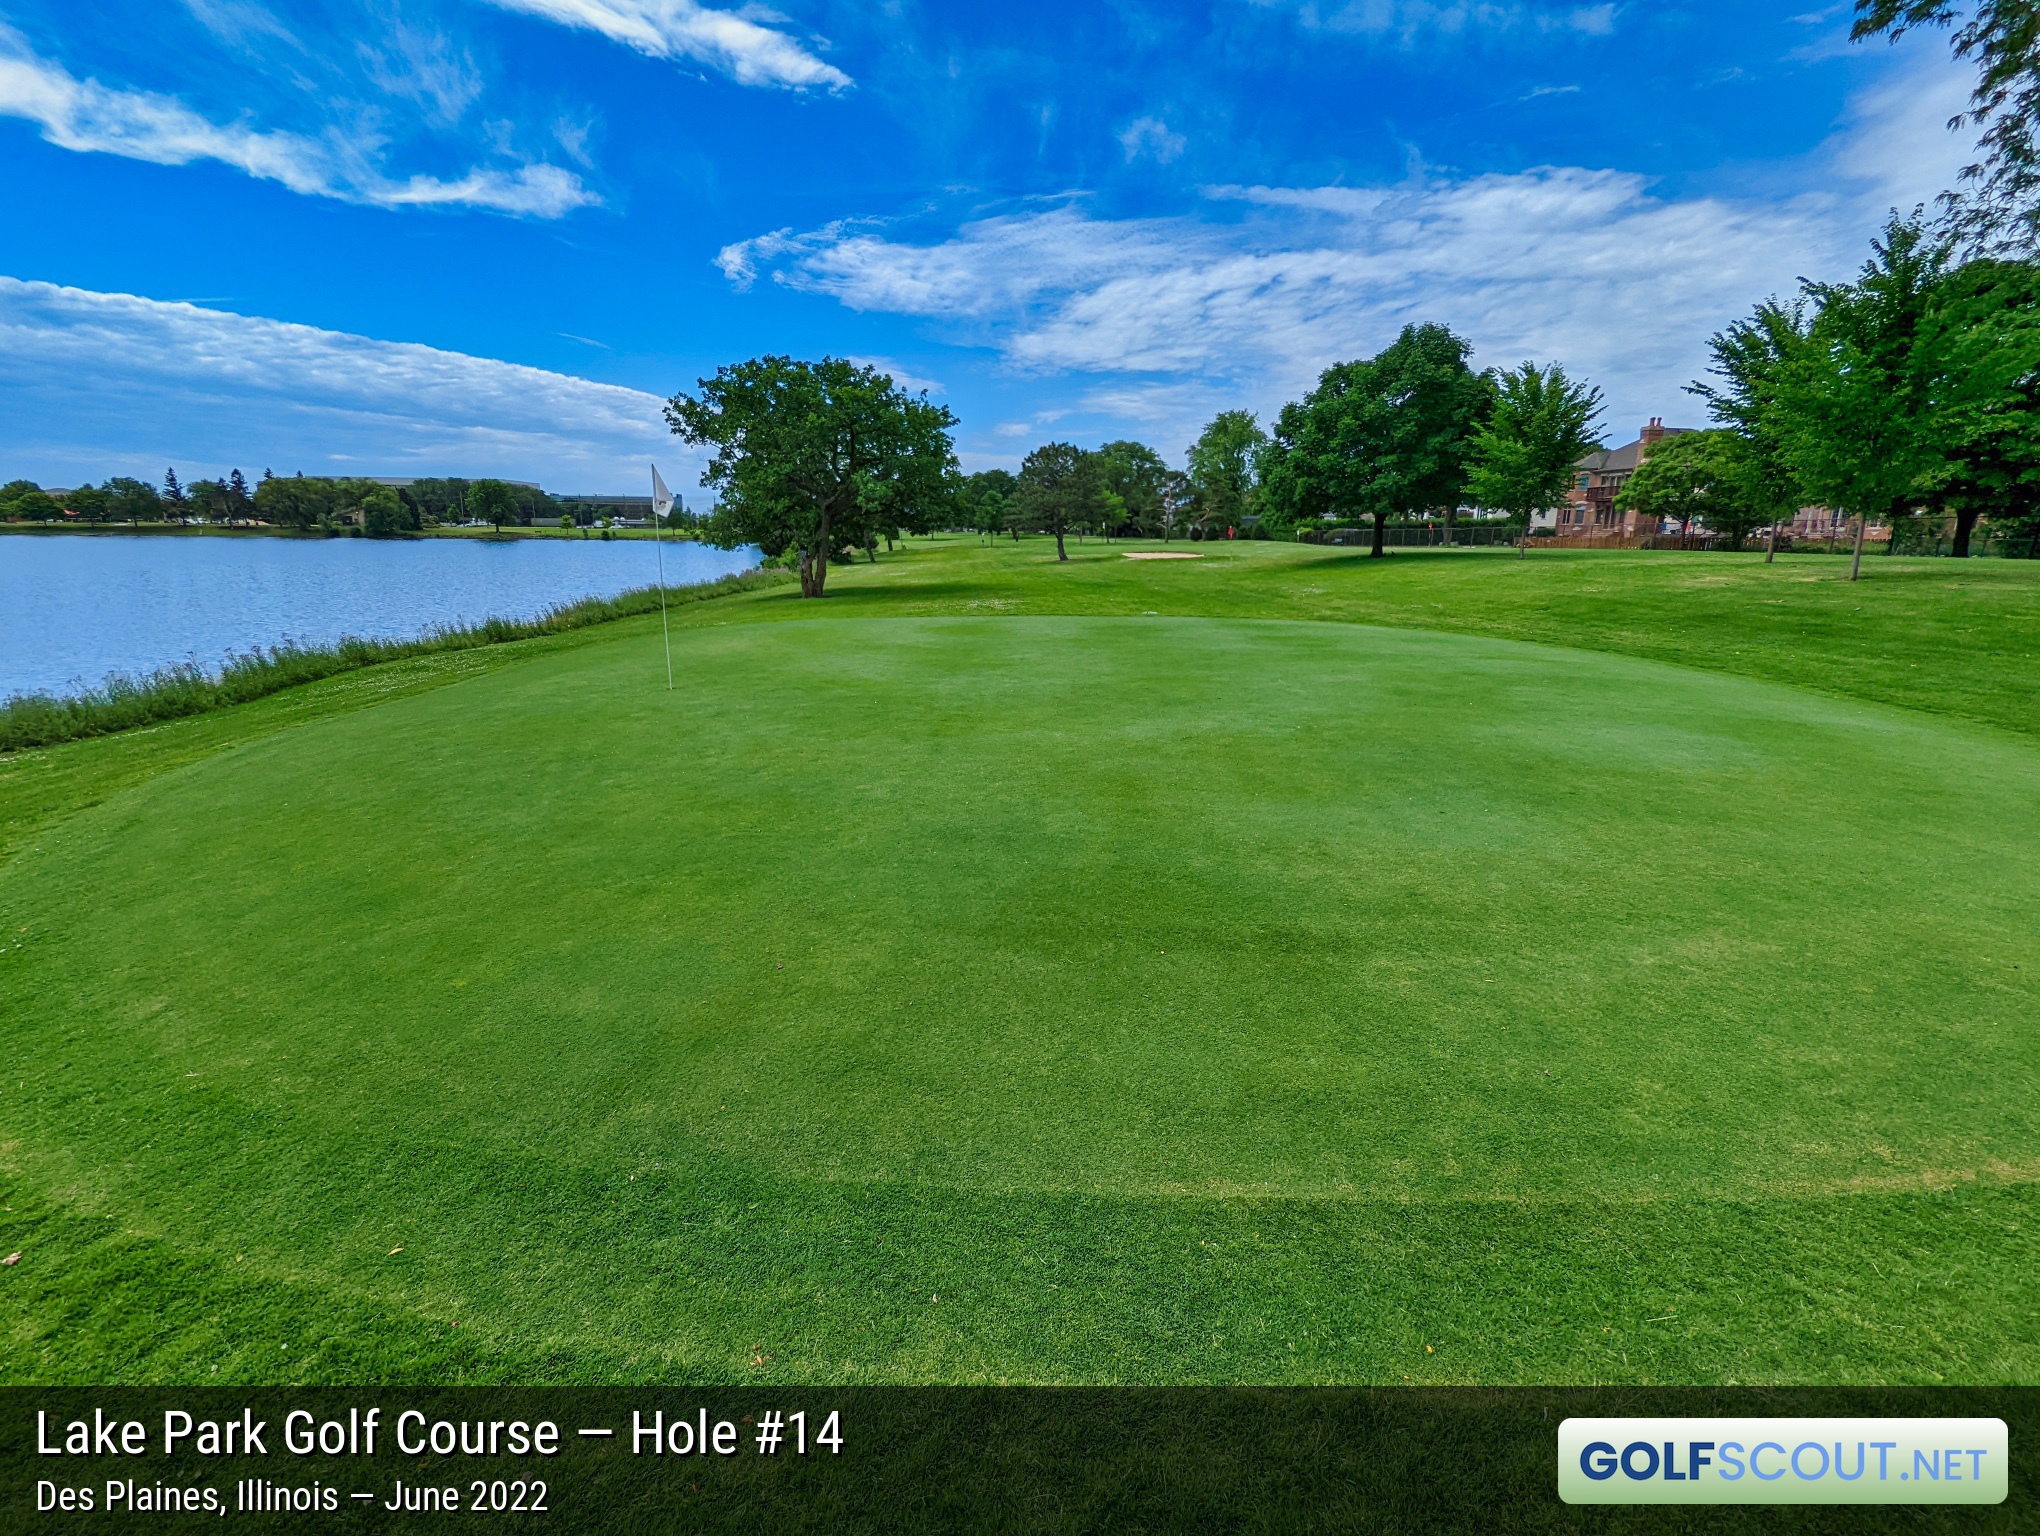 Photo of hole #14 at Lake Park Golf Course in Des Plaines, Illinois. 